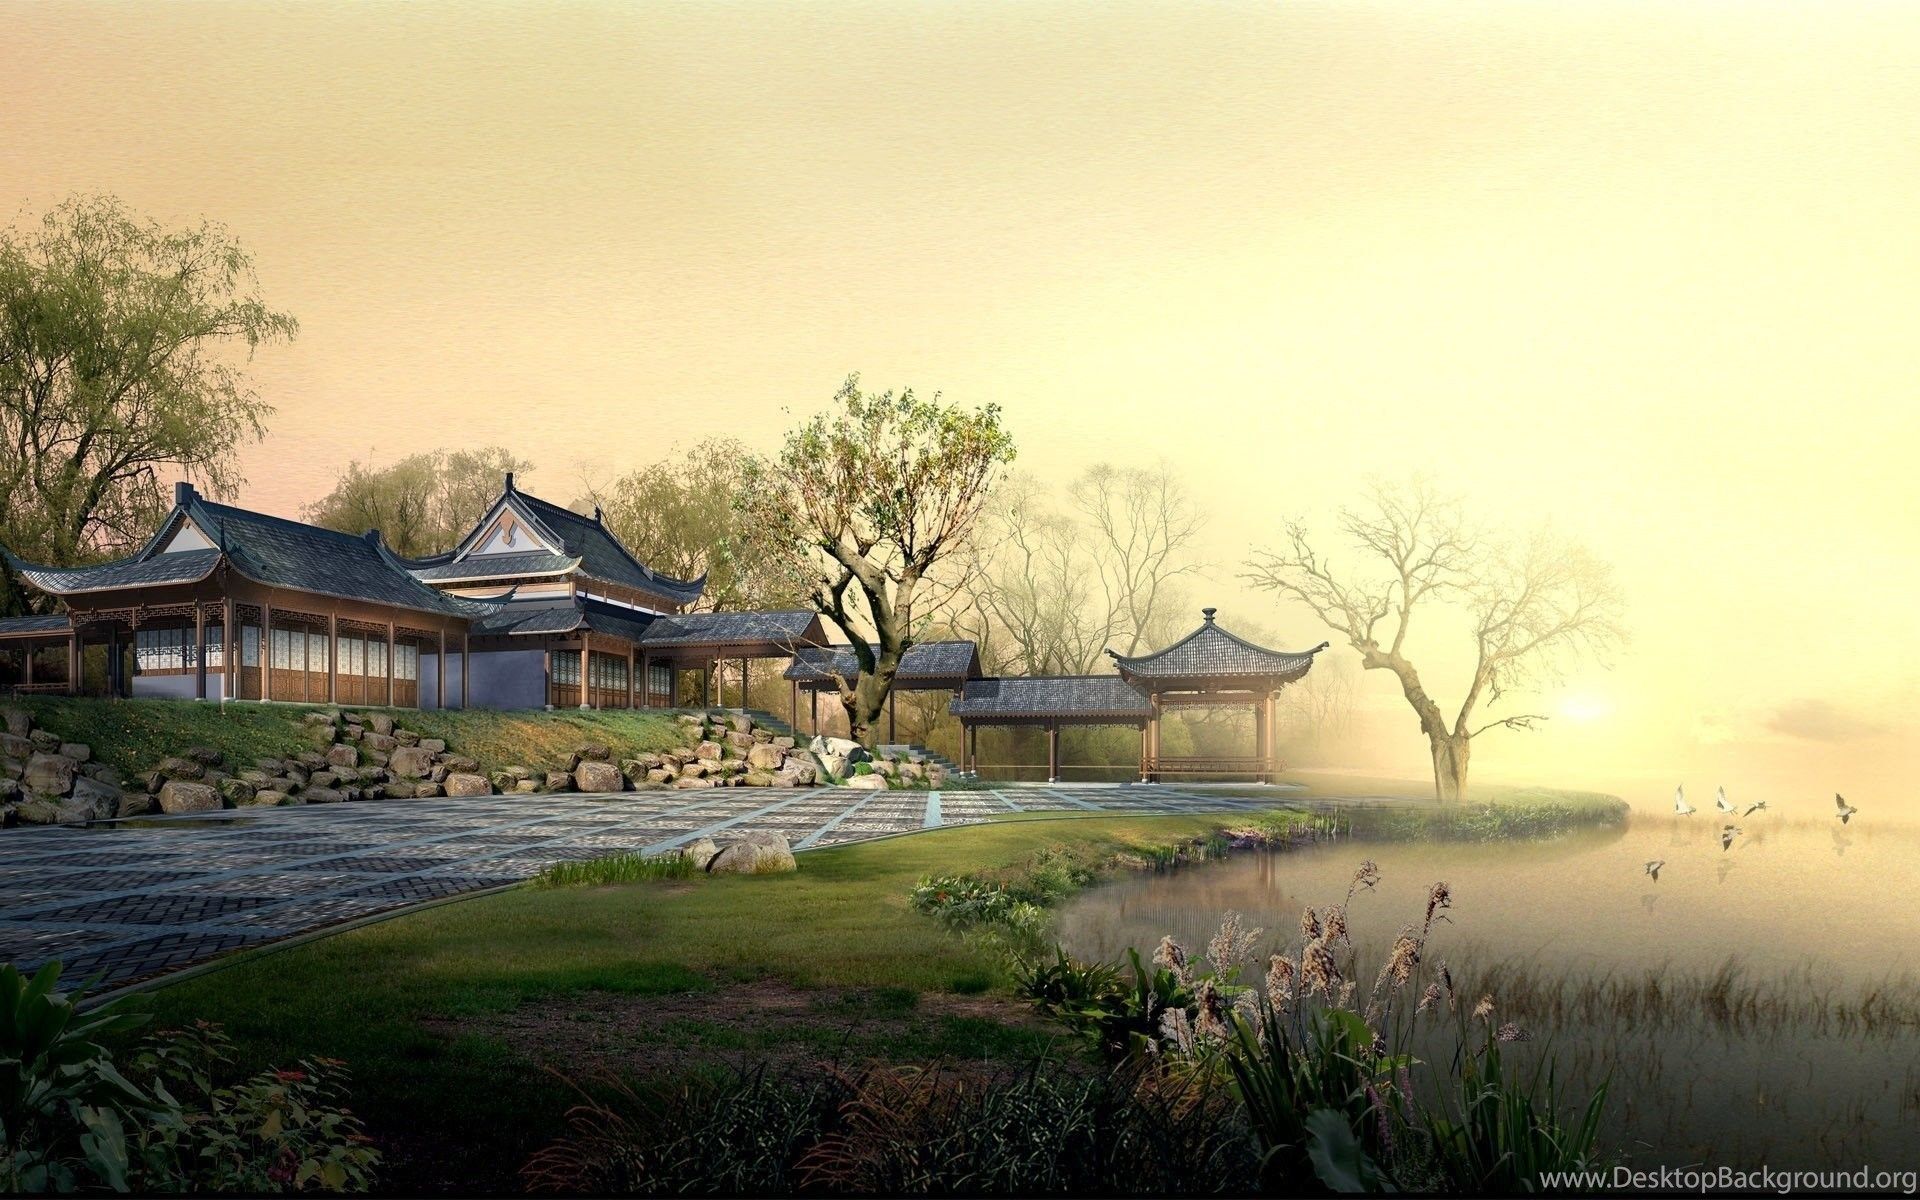 Japanese Landscape In The World Of Anime Wallpaper And Image. Desktop Background